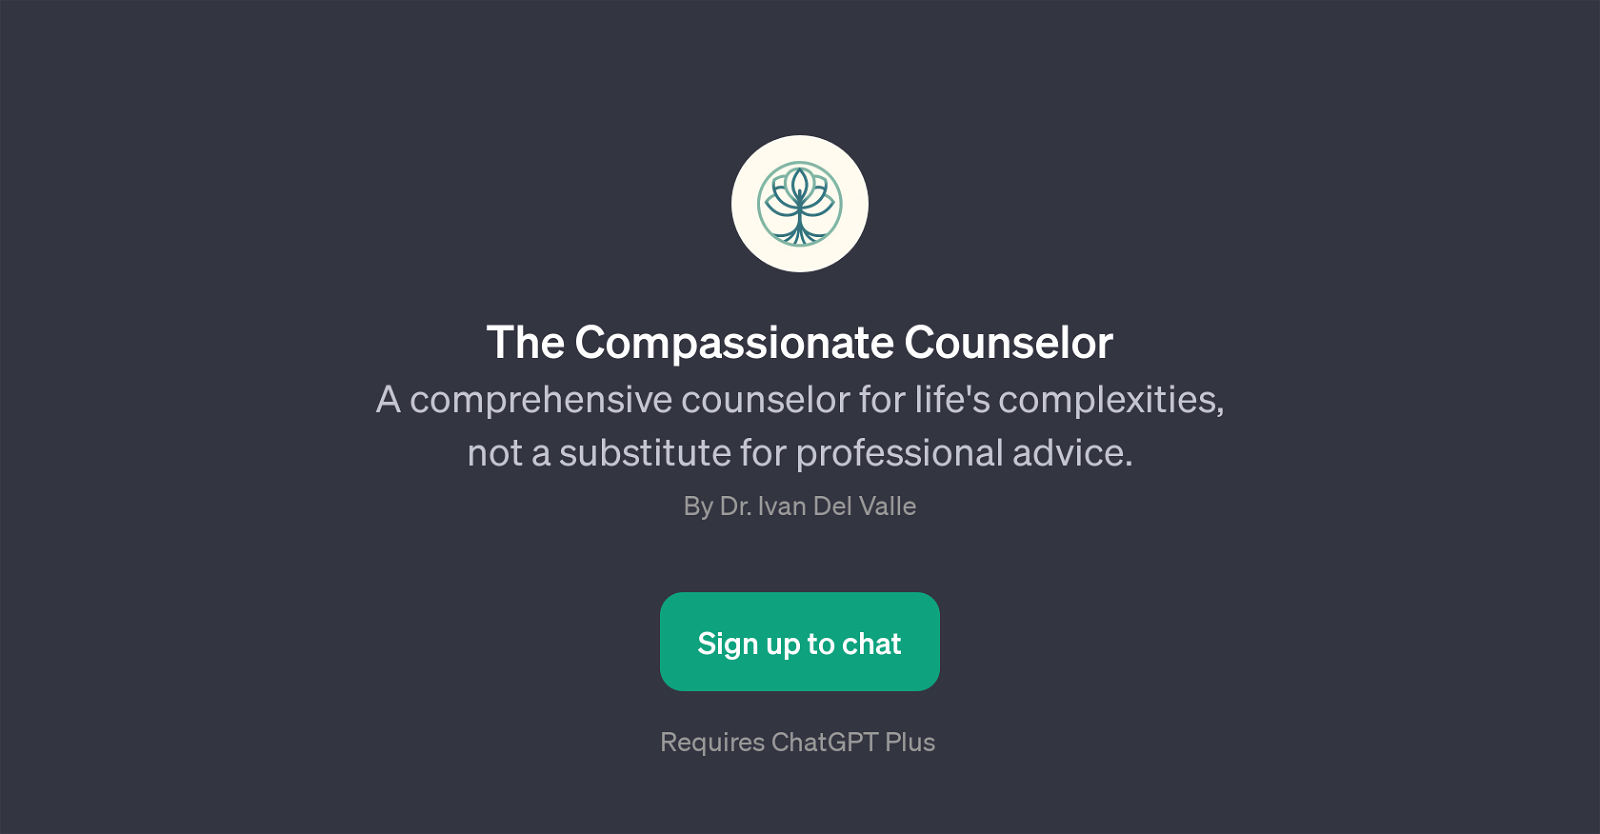 The Compassionate Counselor website